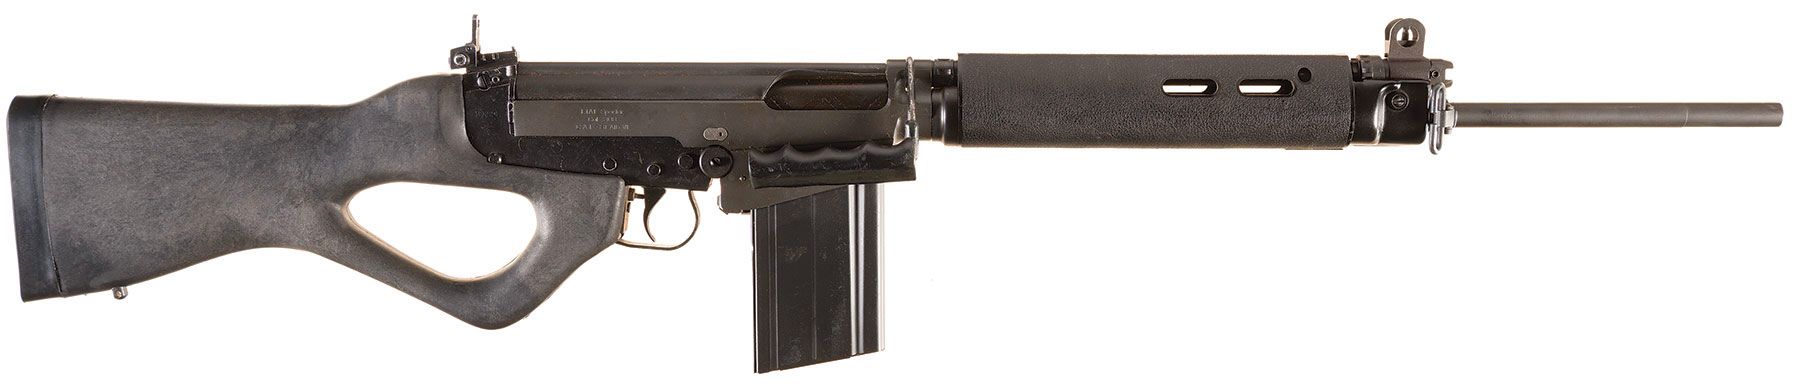 century arms l1a1 inch or metric